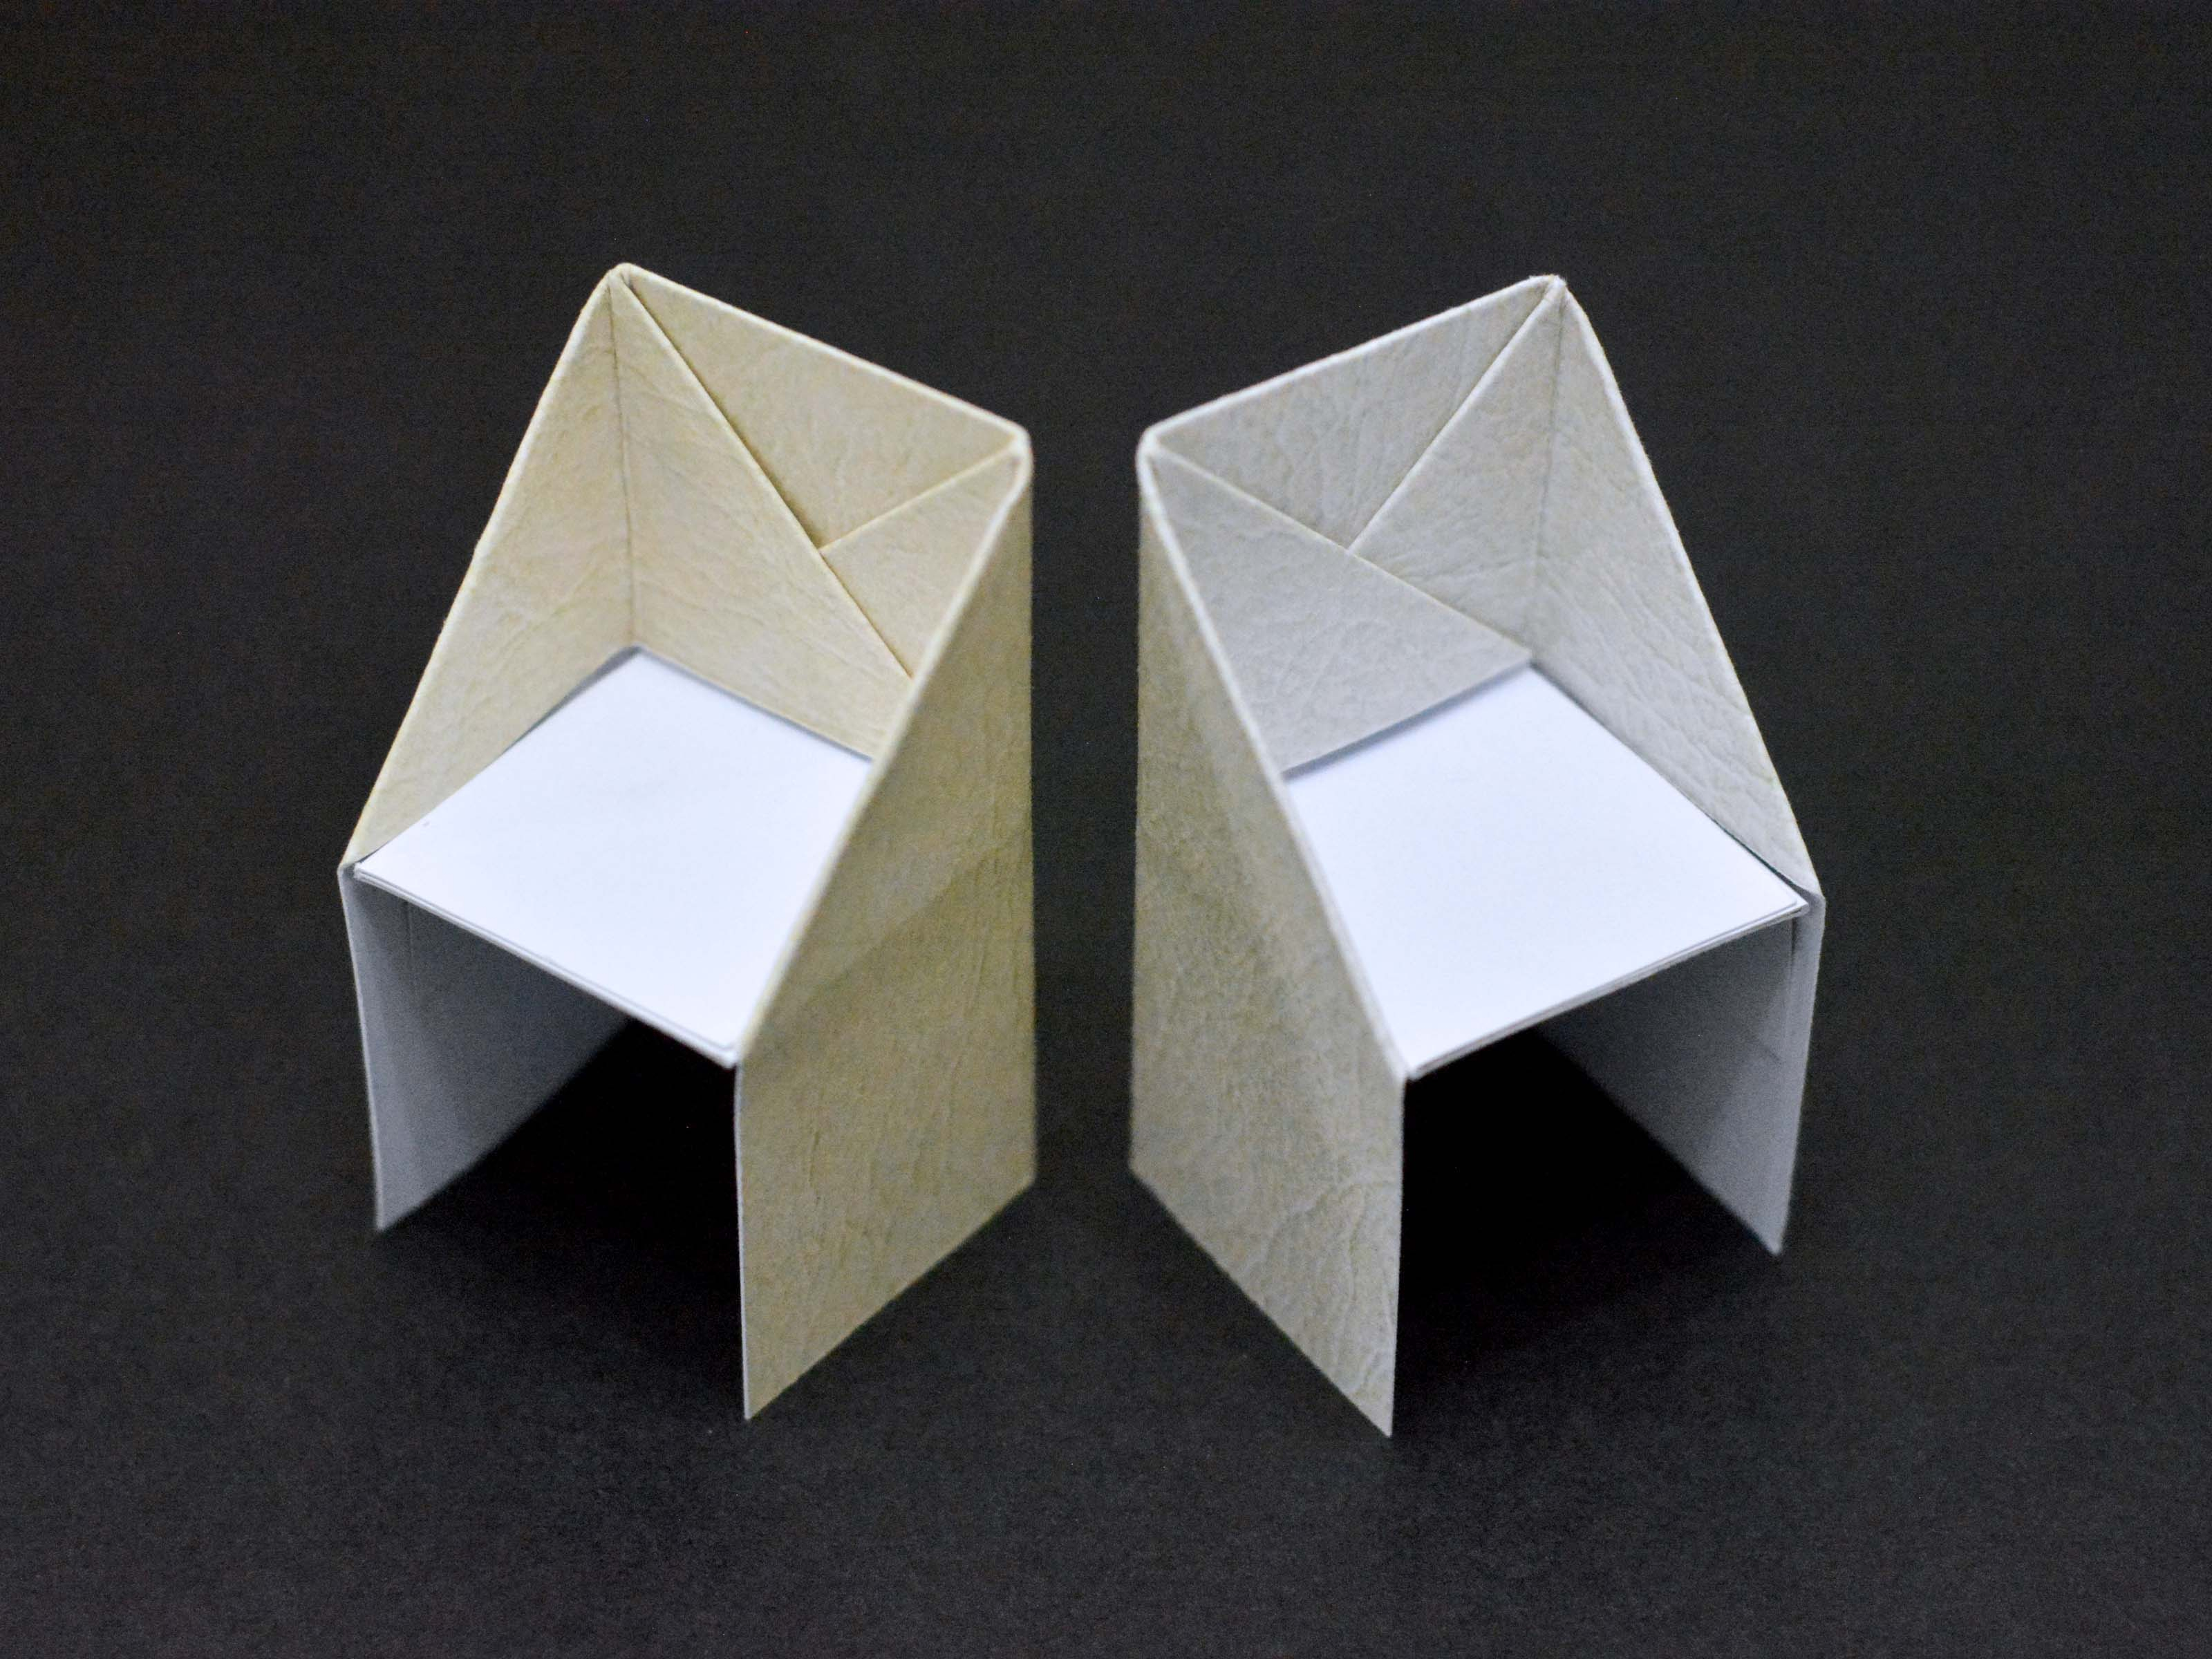 Printer Paper Origami Steps Origami And Craft Collections